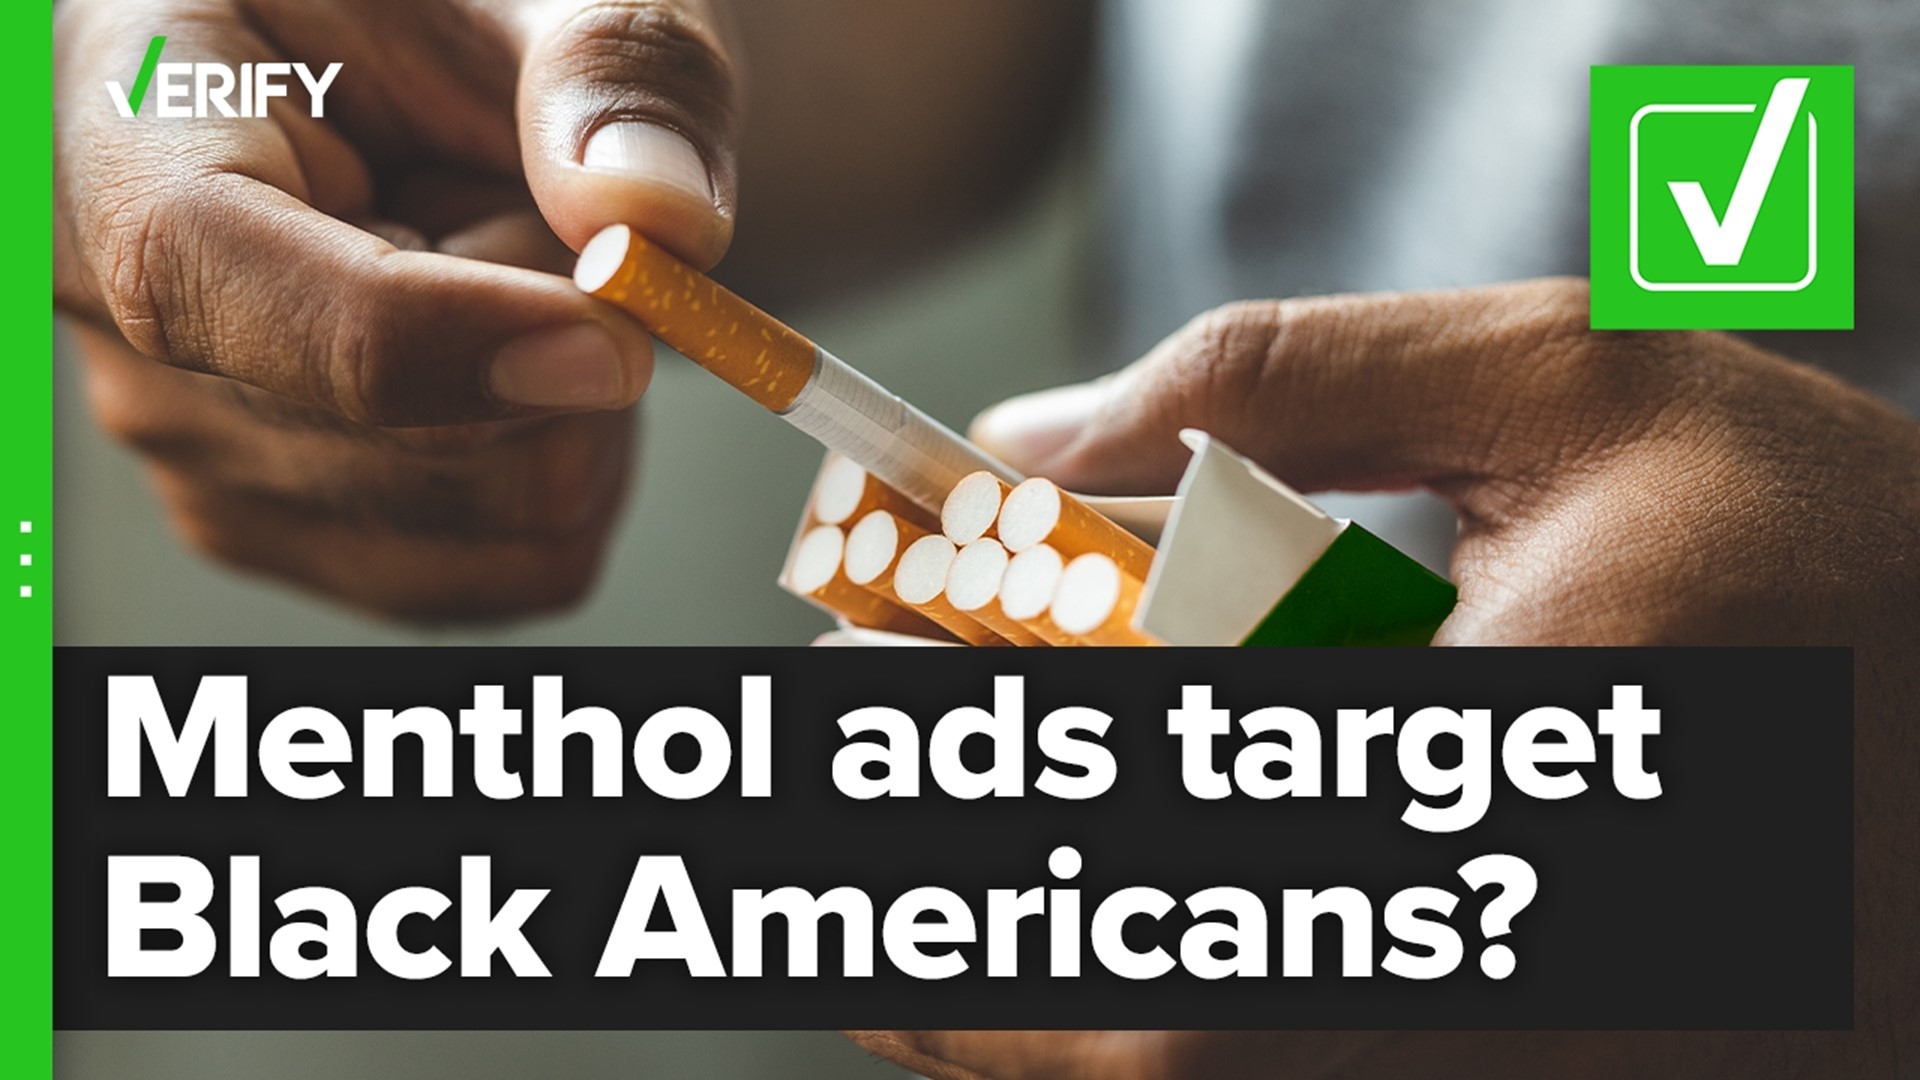 Does the tobacco industry target menthol cigarette advertising to Black Americans? The VERIFY team confirms this is true.